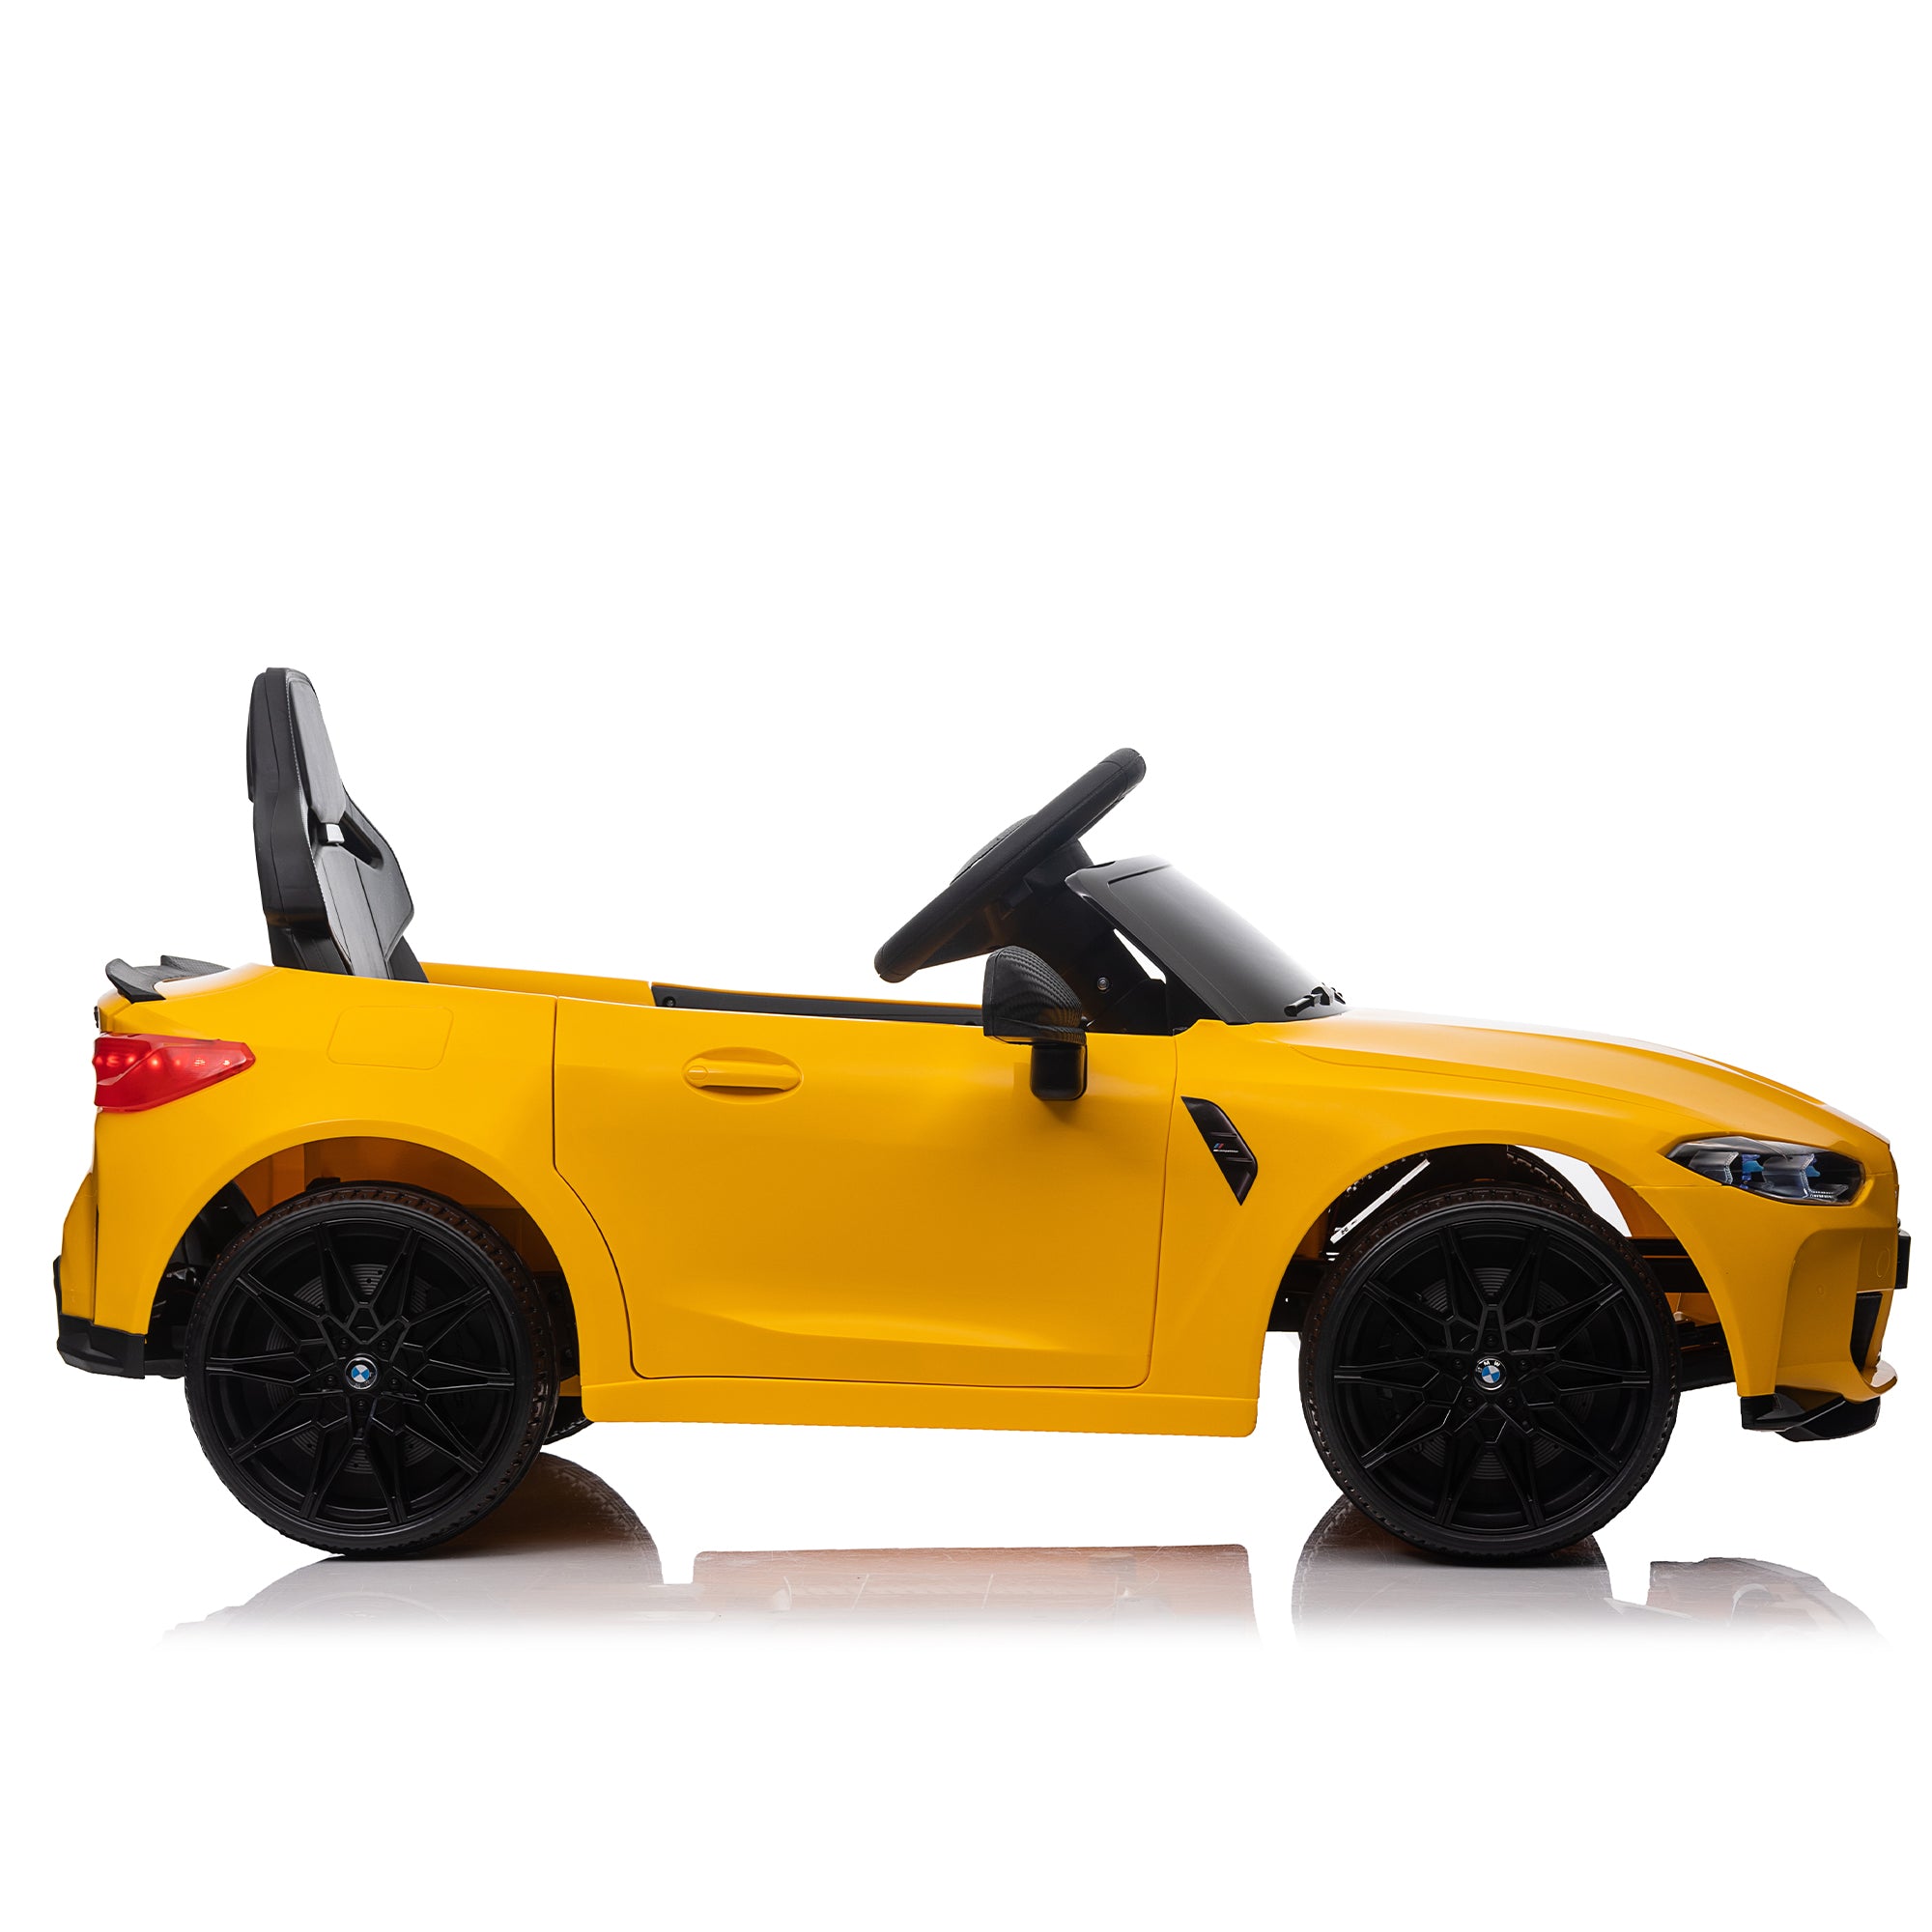 Yellow BMW M4 12v Kids ride on toy car 2.4G W/Parents Remote Control Three speed adjustable